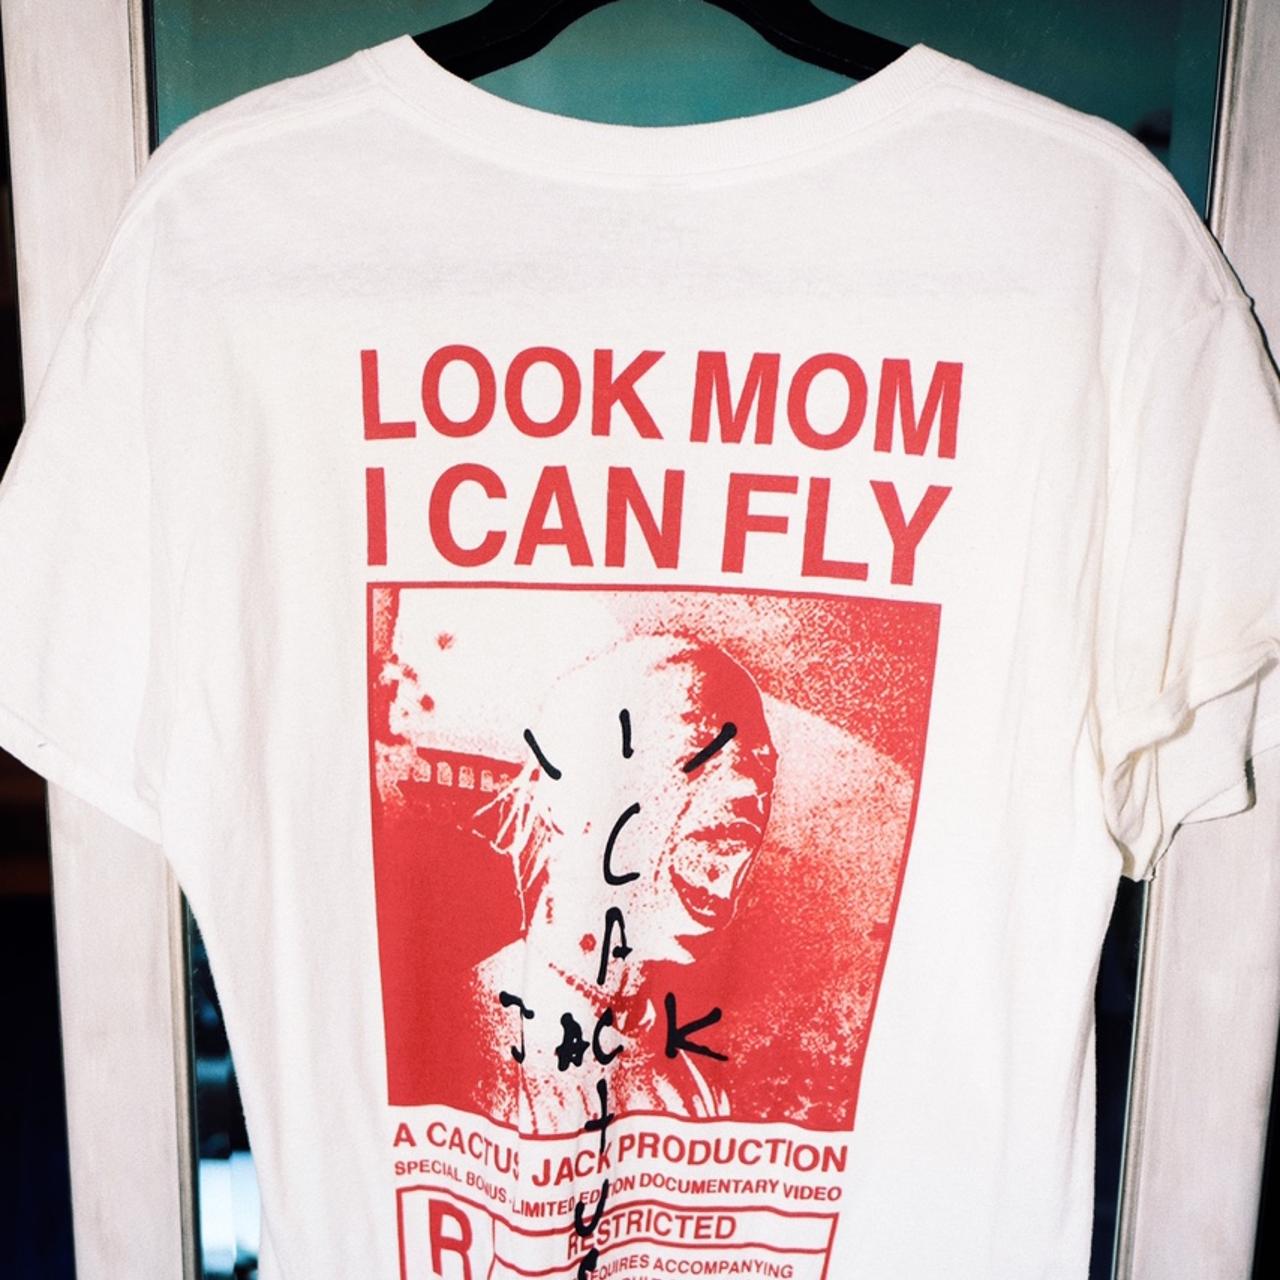 Cactus Jack look Mom I Can FLY T-Shirt, Travis Scott ASTROWORLD T